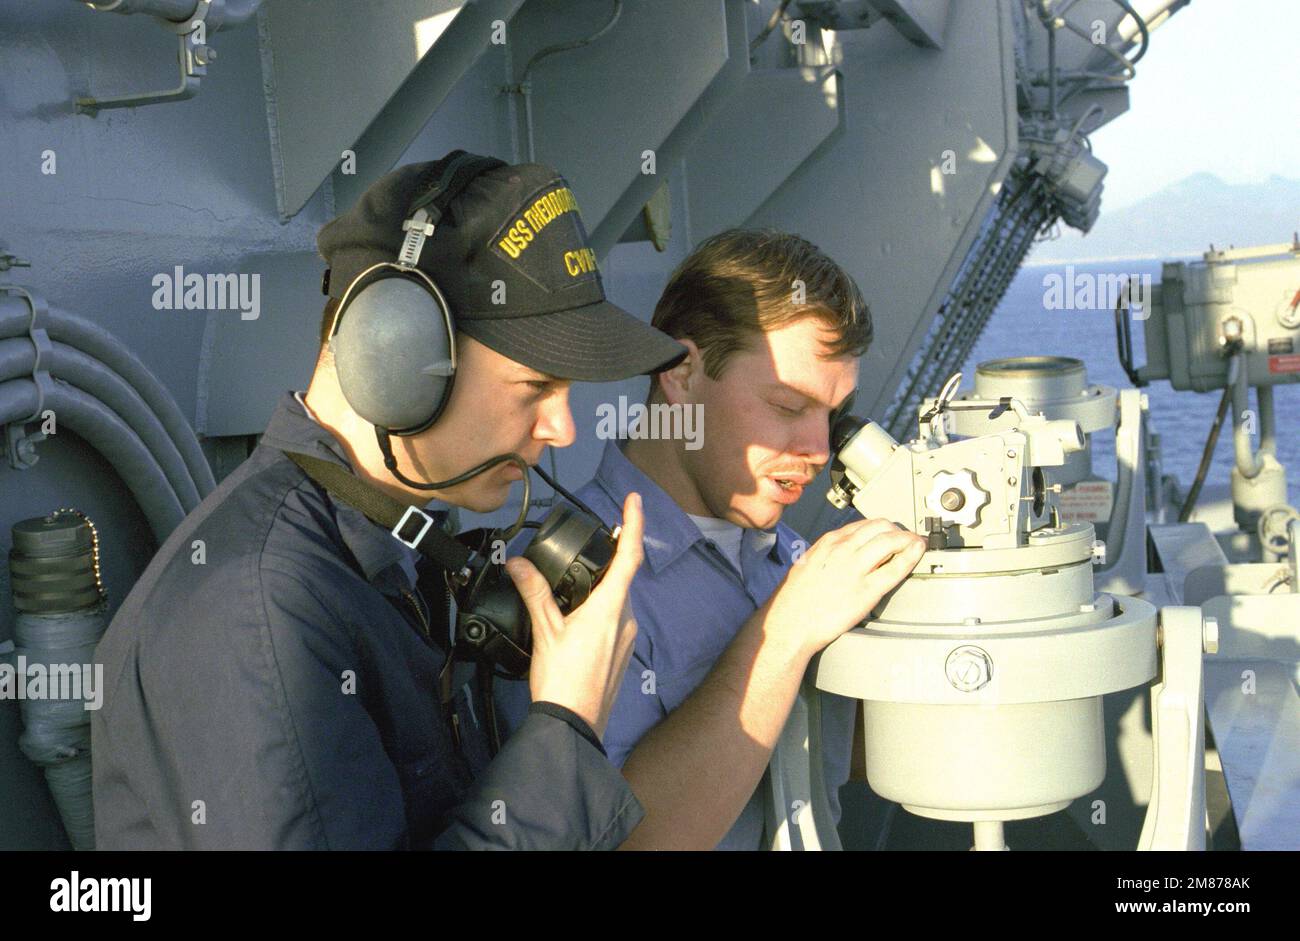 A sailor aboard the nuclear-powered aircraft carrier USS THEODORE ROOSEVELT (CVN-71) uses a telescopic alidade to take a bearing as a phone talker wearing a sound-powered phone stands by to relay the information to the bridge. Country: Unknown Stock Photo